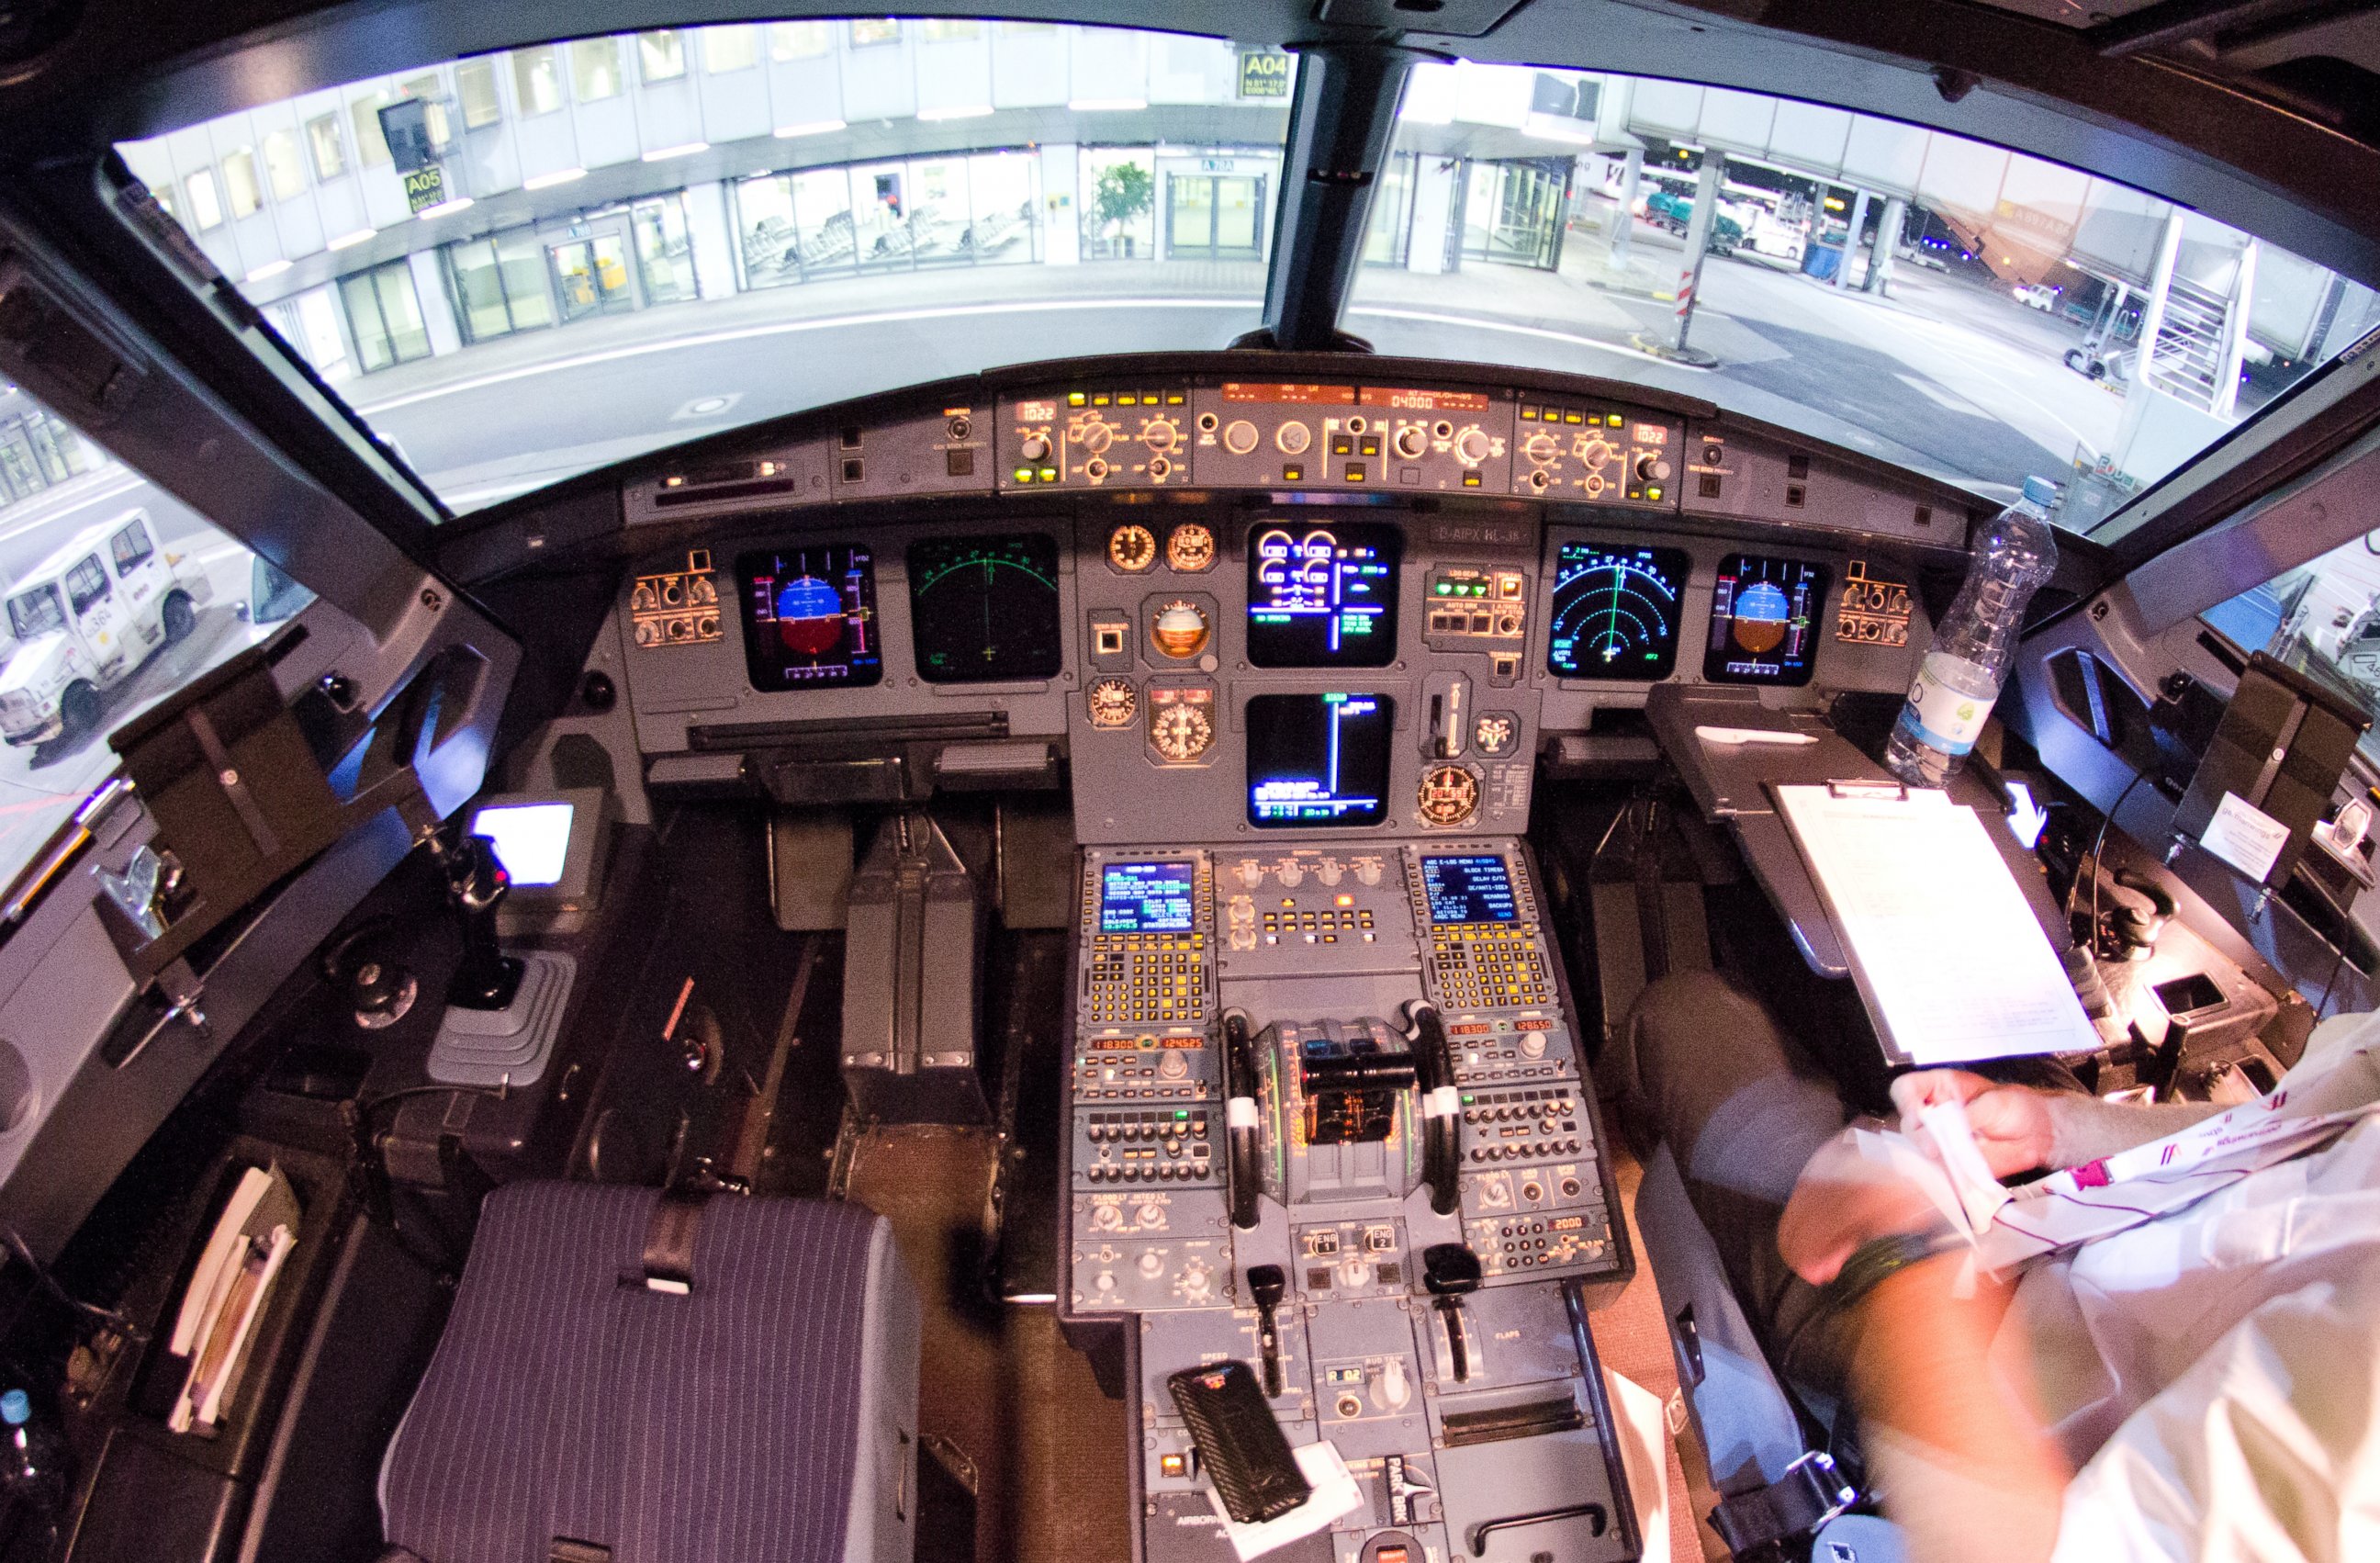 PHOTO: This picture shows a view of the interior cockpit of a Germanwings A320 aircraft in Dusseldorf, Germany on March 22, 2015. 